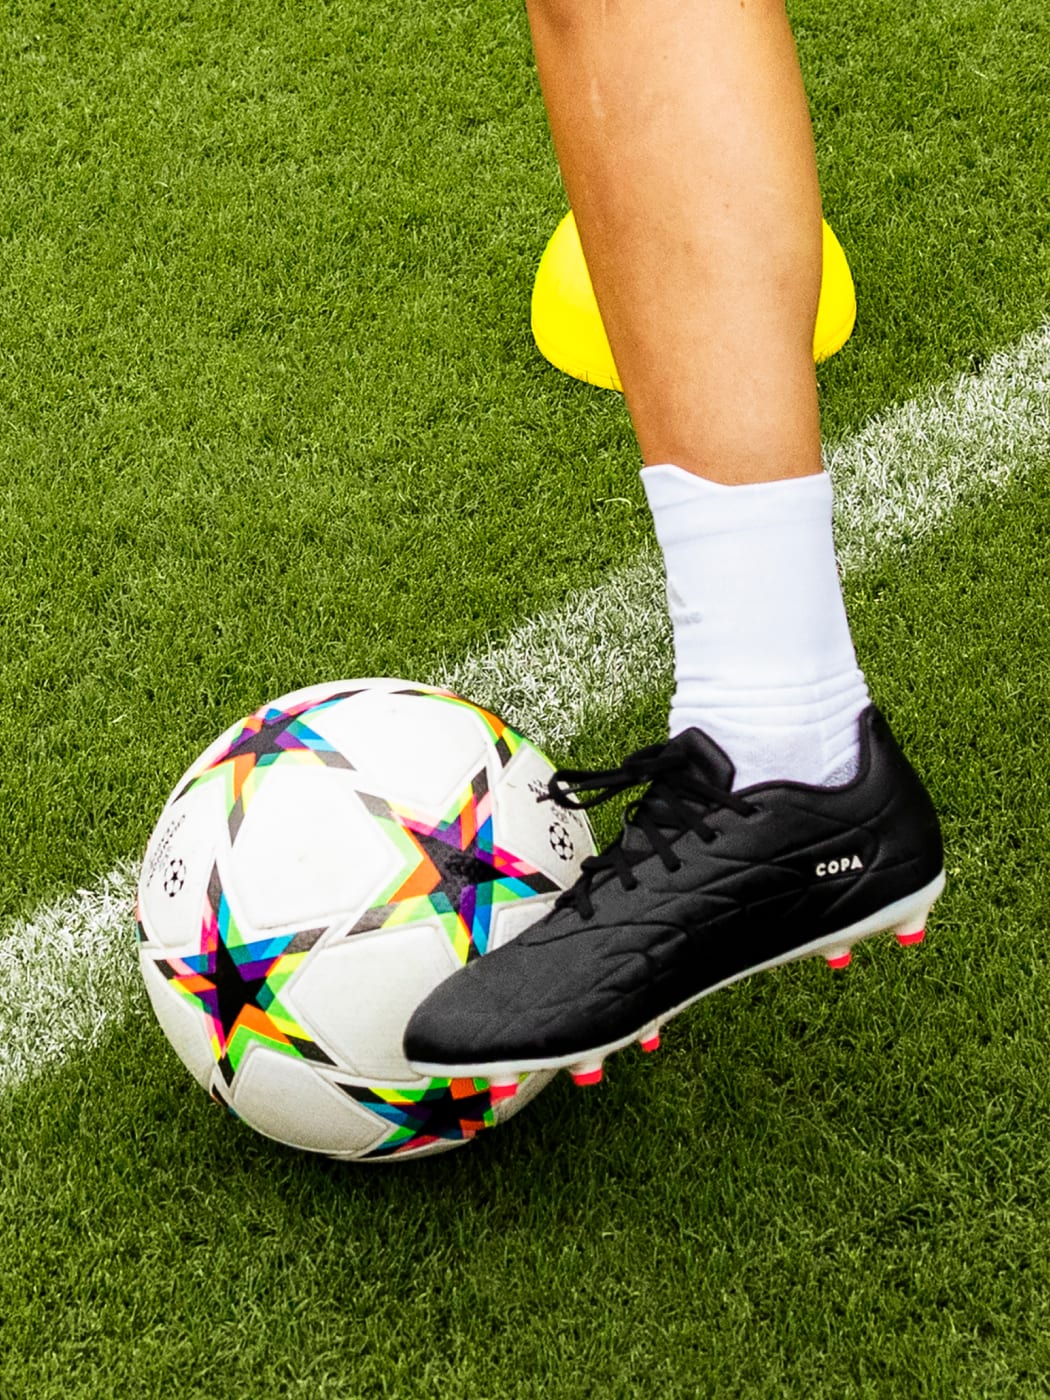 Best Indoor Soccer Shoes: Find Your Perfect Pair Now!